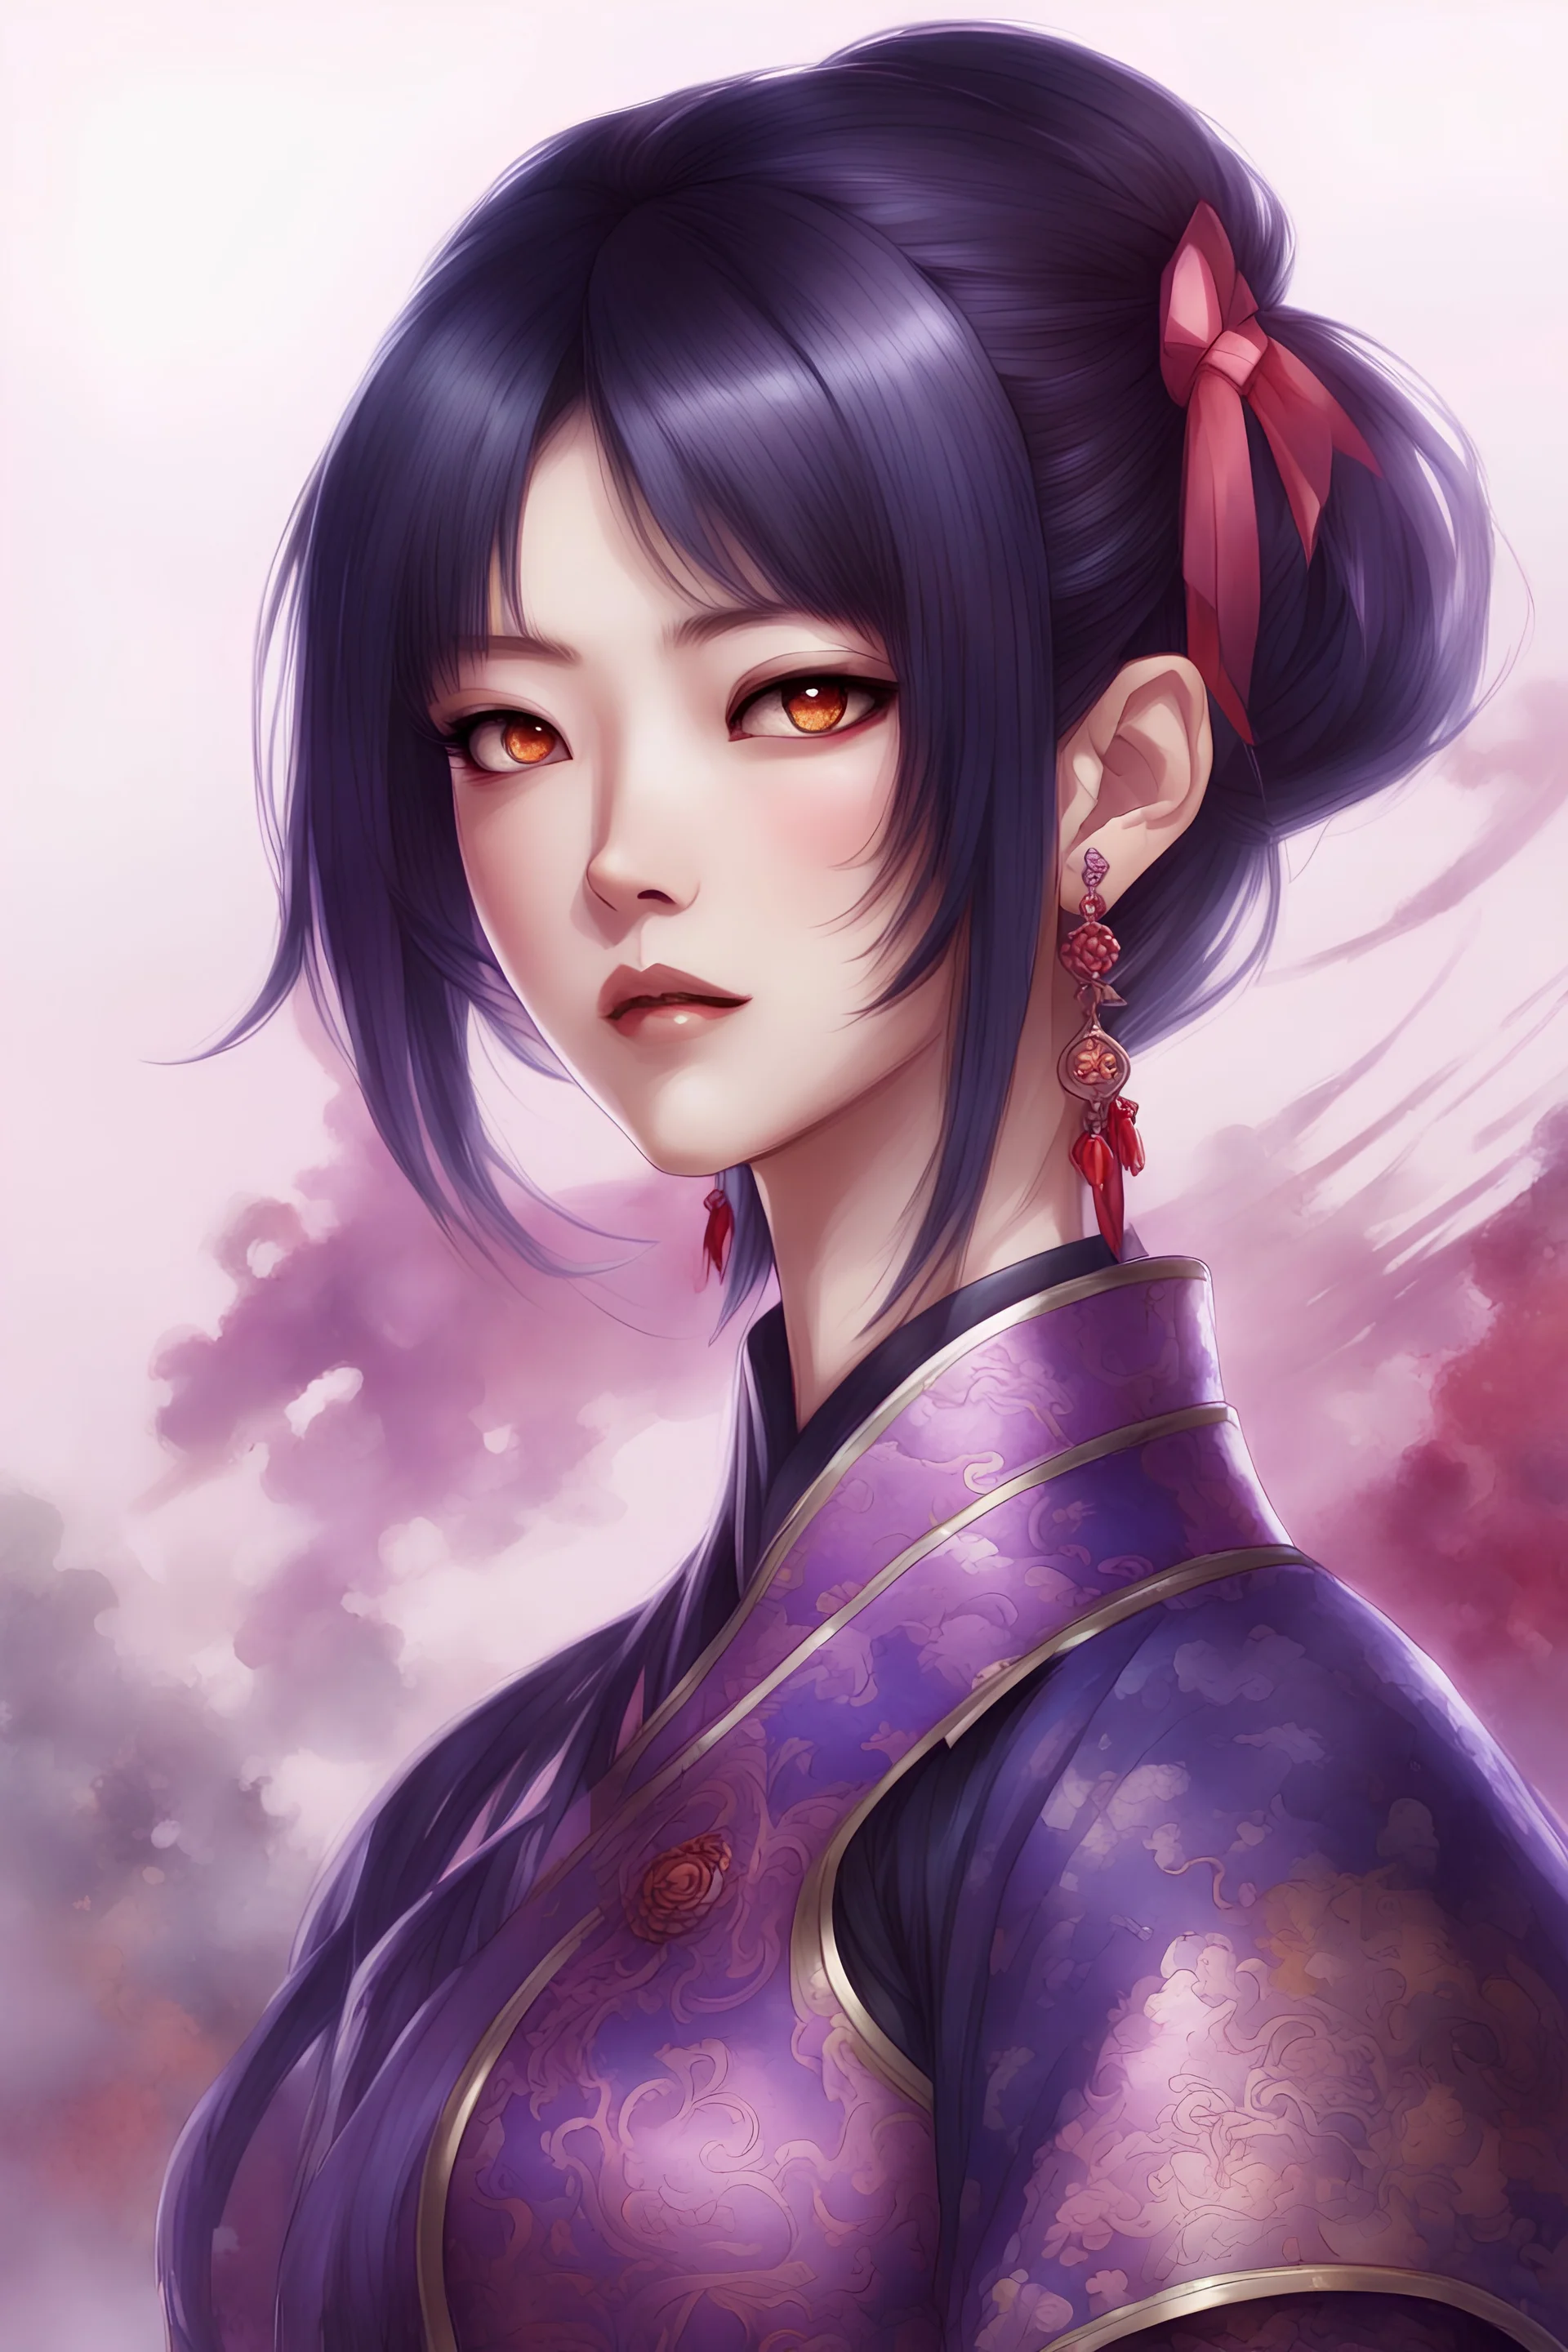 Anime Art, Mature woman, black hair with purple highlights, xiaohongshu hair style, Violet Qipao armor with pattern, honmeet, dark pink hair ribbon, SFW, Wuxia background, aggressive, small mole on face, shoulder guard, earrings, red eyeliner and lips, red hair streak